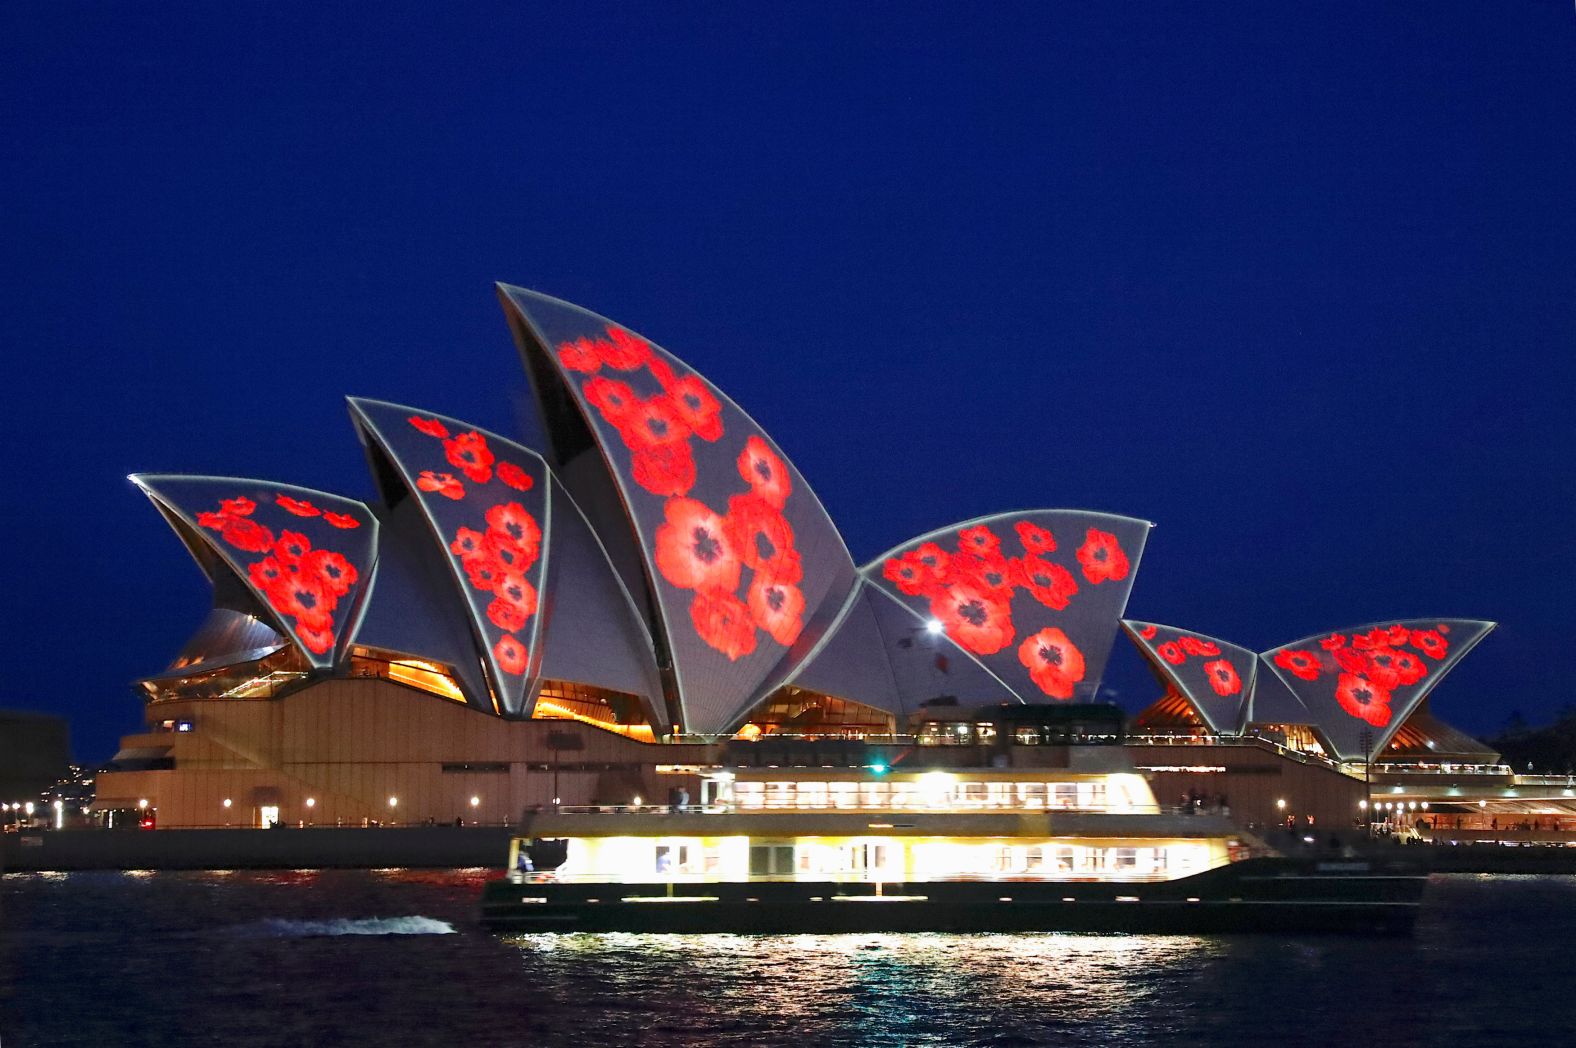 A ferry passes in front of the Sydney Opera House Sunday as red poppies are projected onto the sails to mark the centenary of the Armistice ending World War I. 